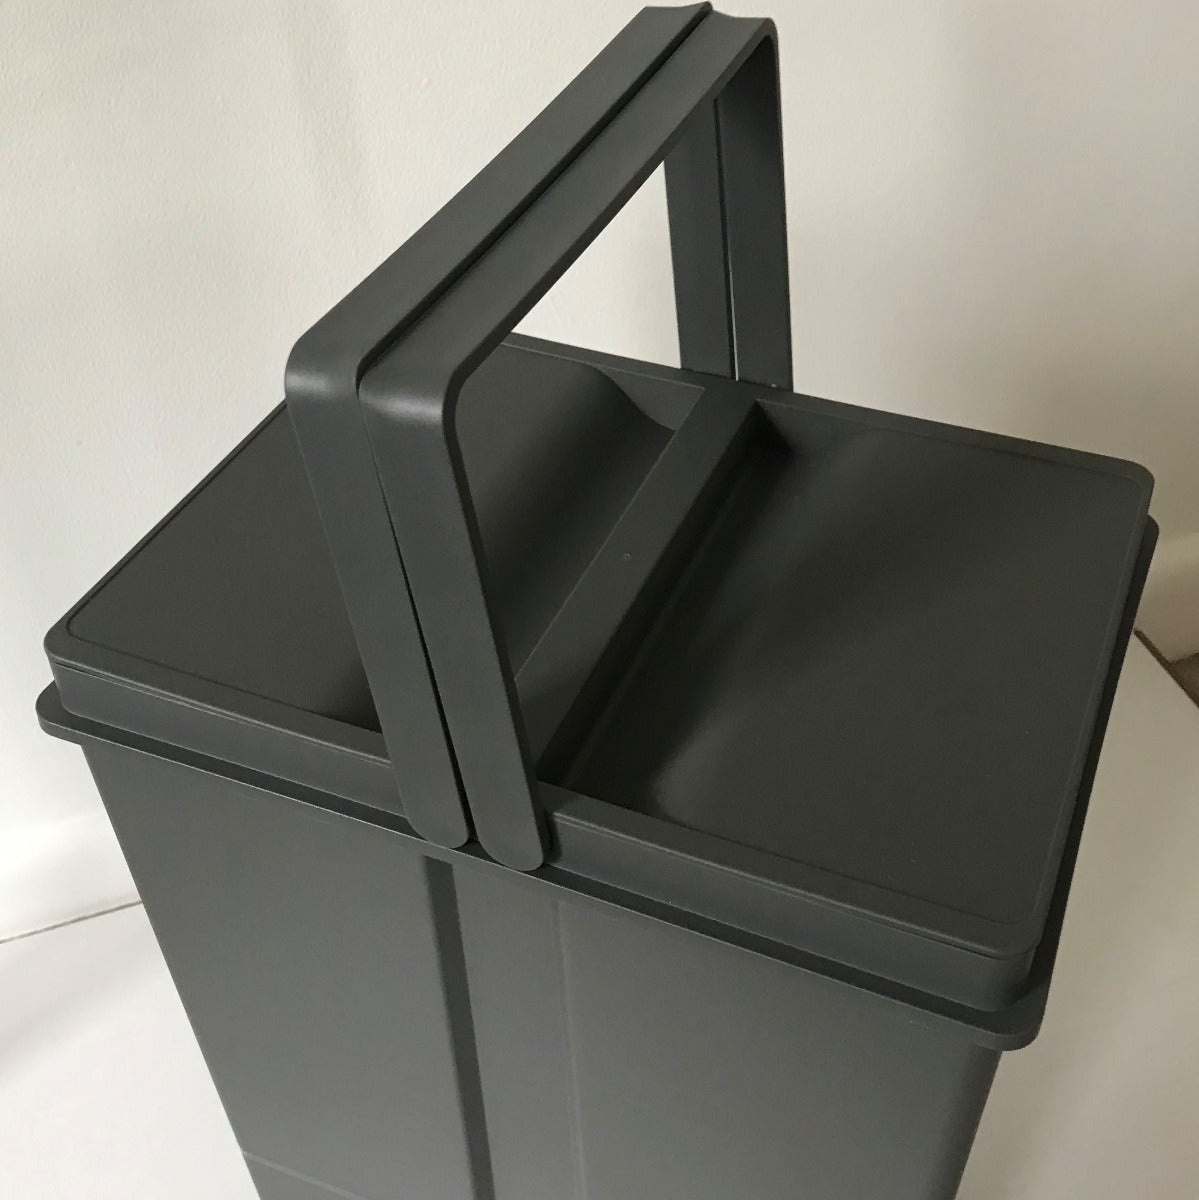 The two 40 Litre buckets are in a dark Orion Grey complete with handles and individual lids